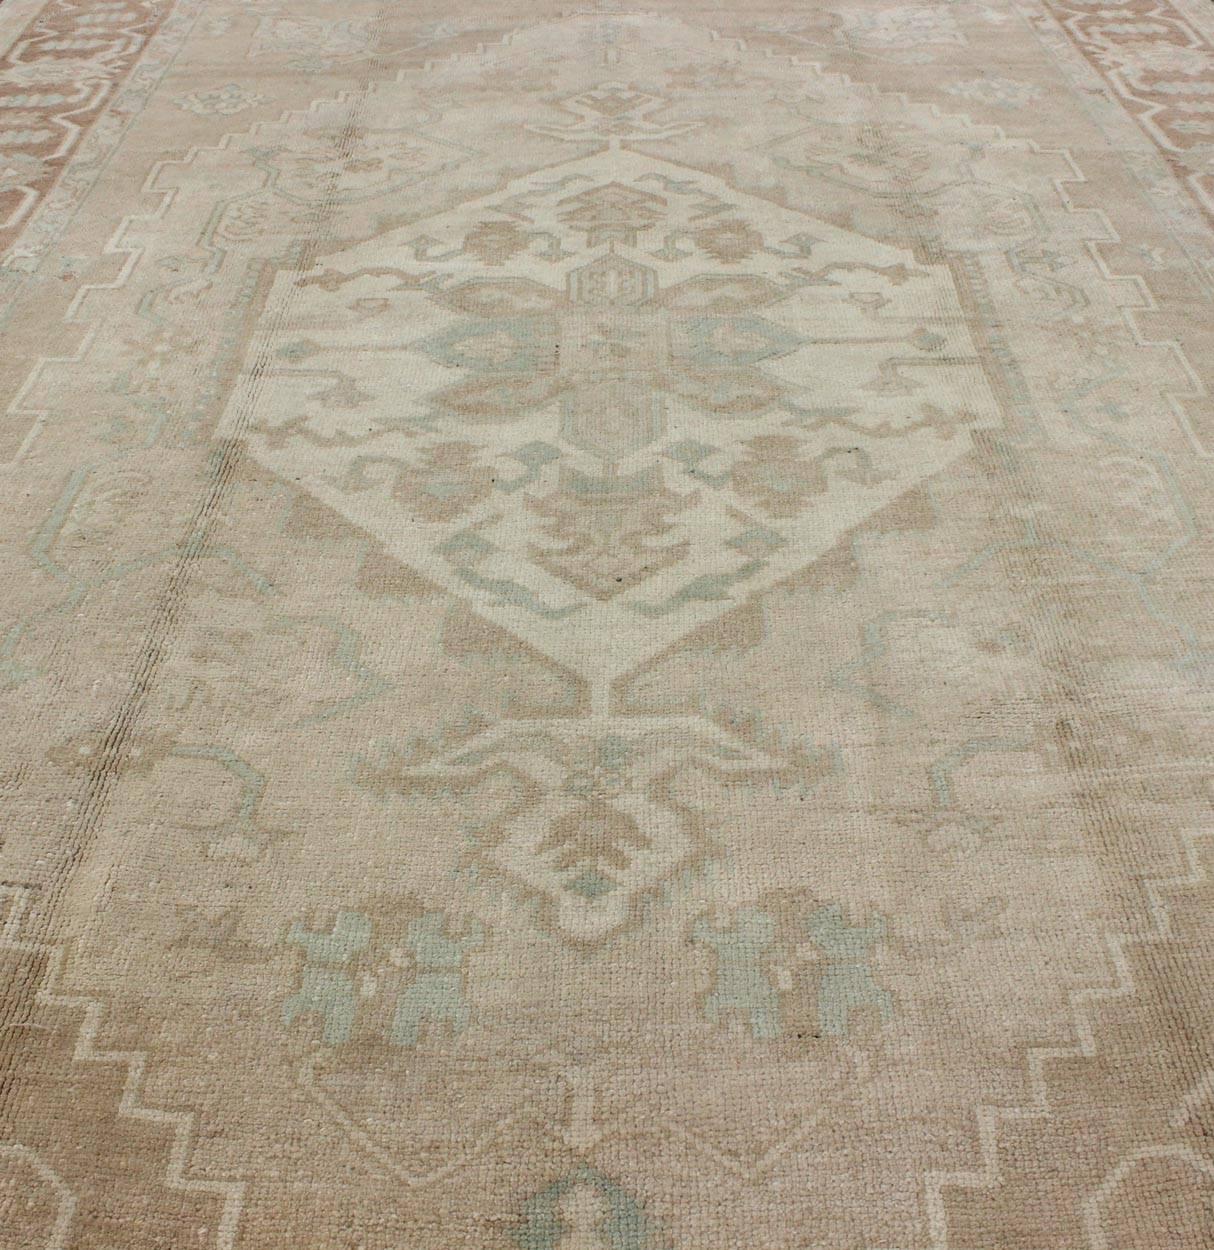 Vintage Oushak Medallion Rug With Muted Colors and Earth Tones In Good Condition For Sale In Atlanta, GA